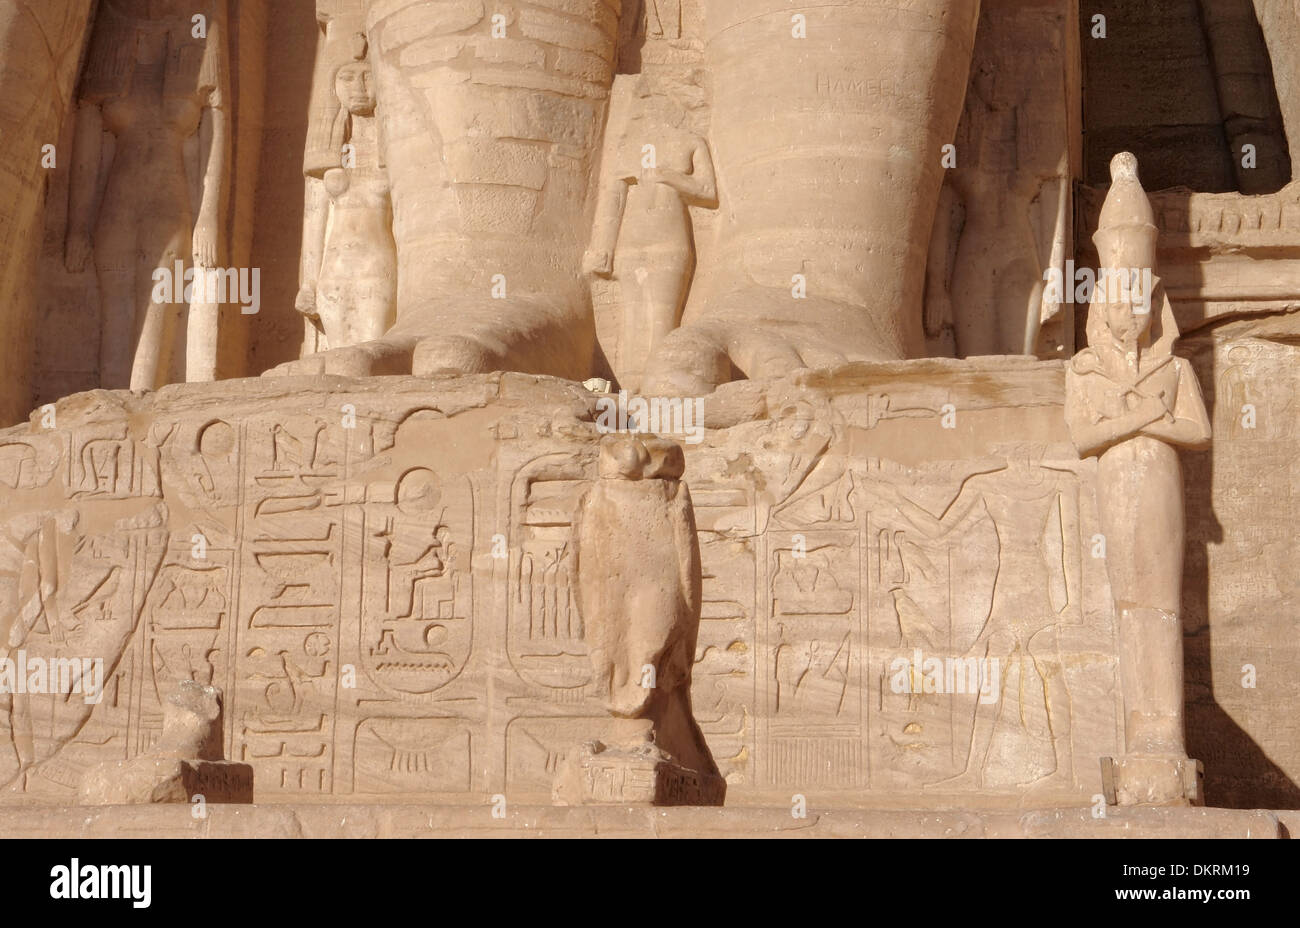 architectural detail of the historic Abu Simbel temples in Egypt (Africa) with stone sculptures and hieroglyphics Stock Photo